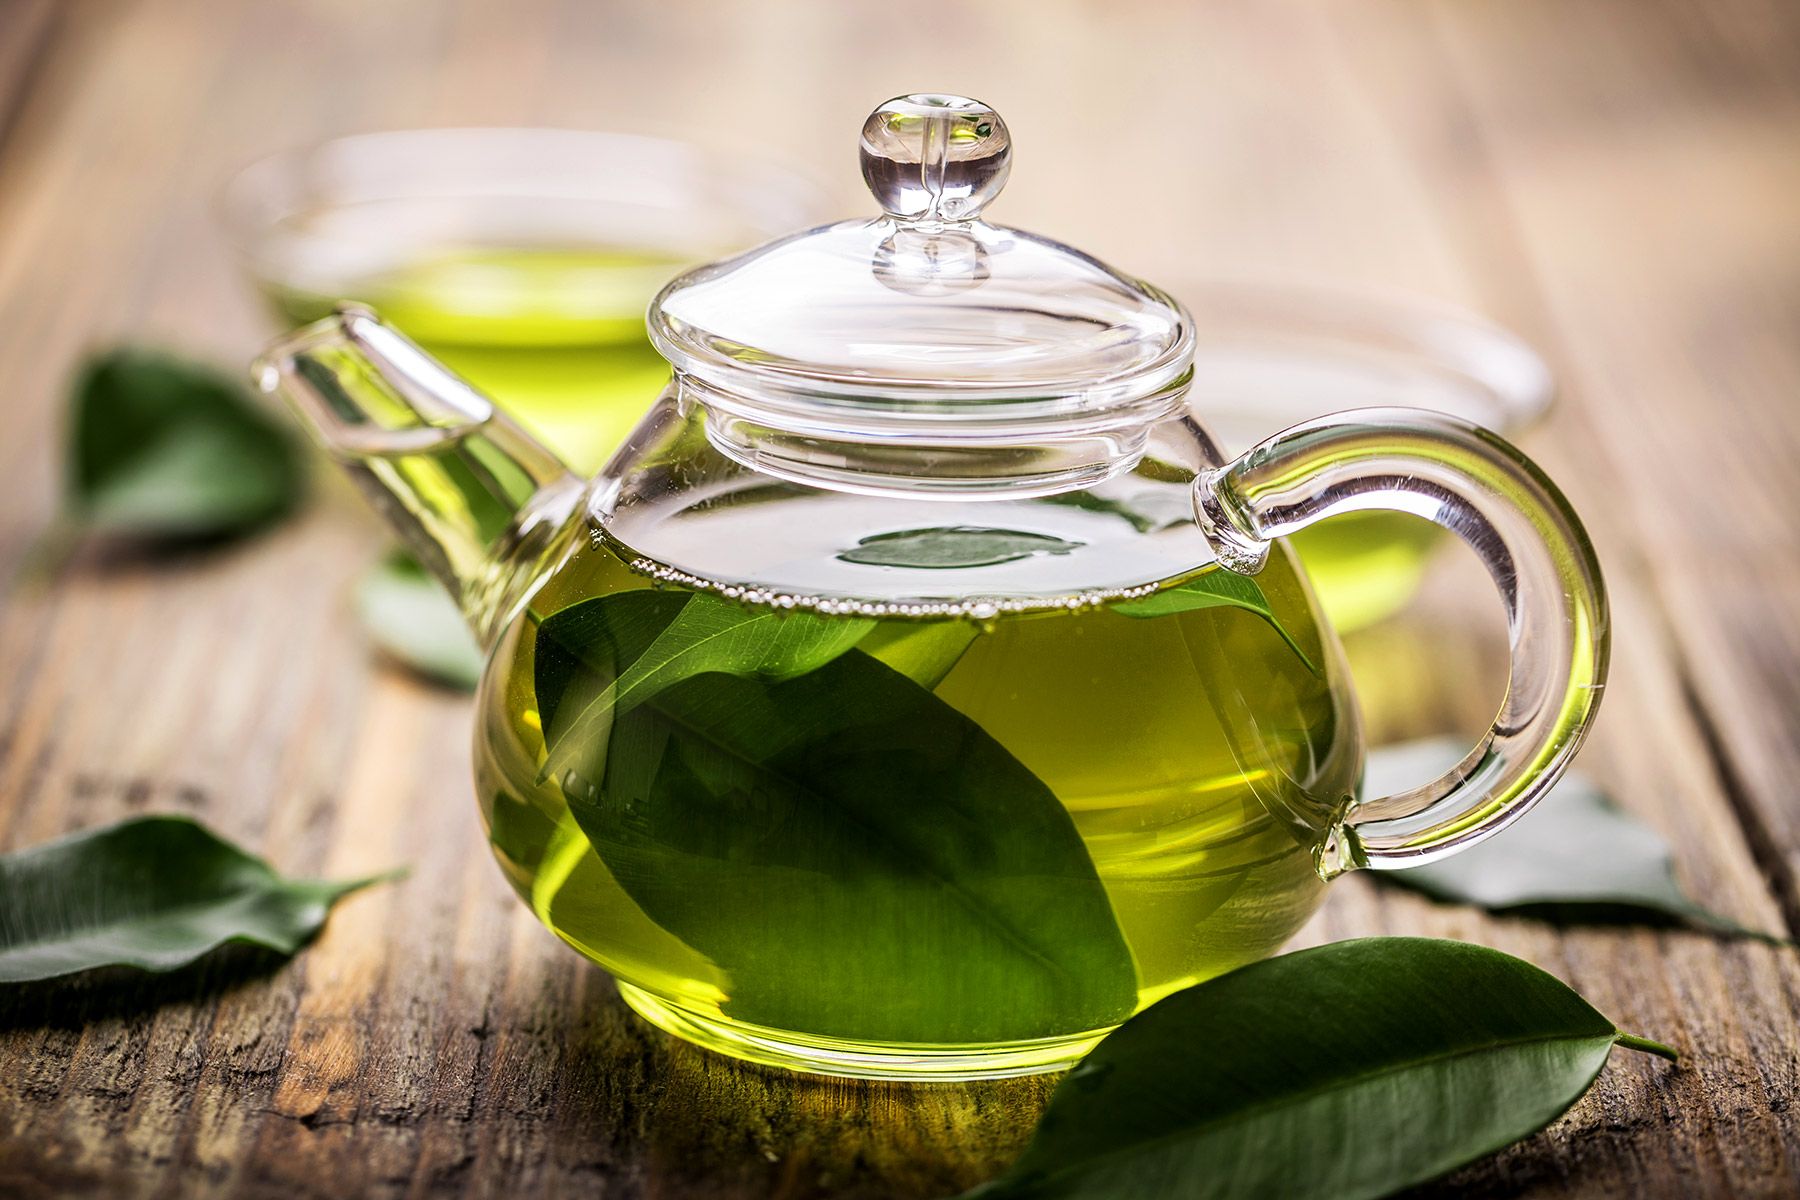 Green tea and coffee can help prevent a second heart attack